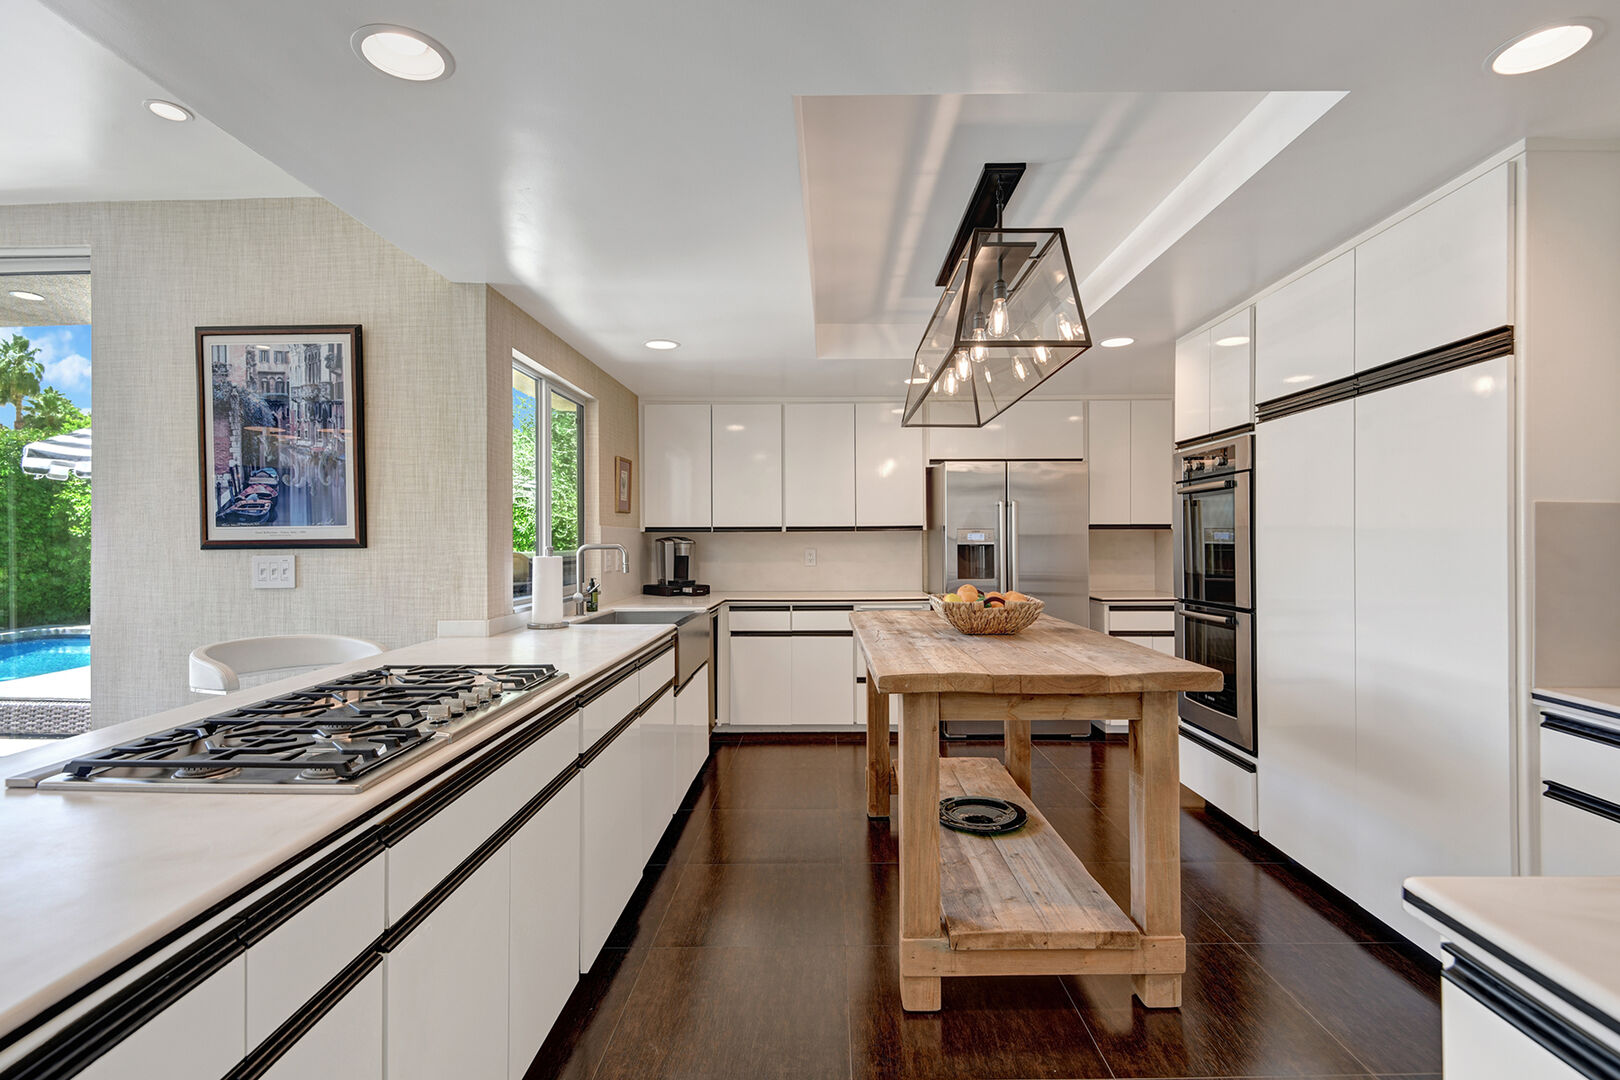 STAINLESS STEEL APPLIANCES AND CHEFS KITCHEN!